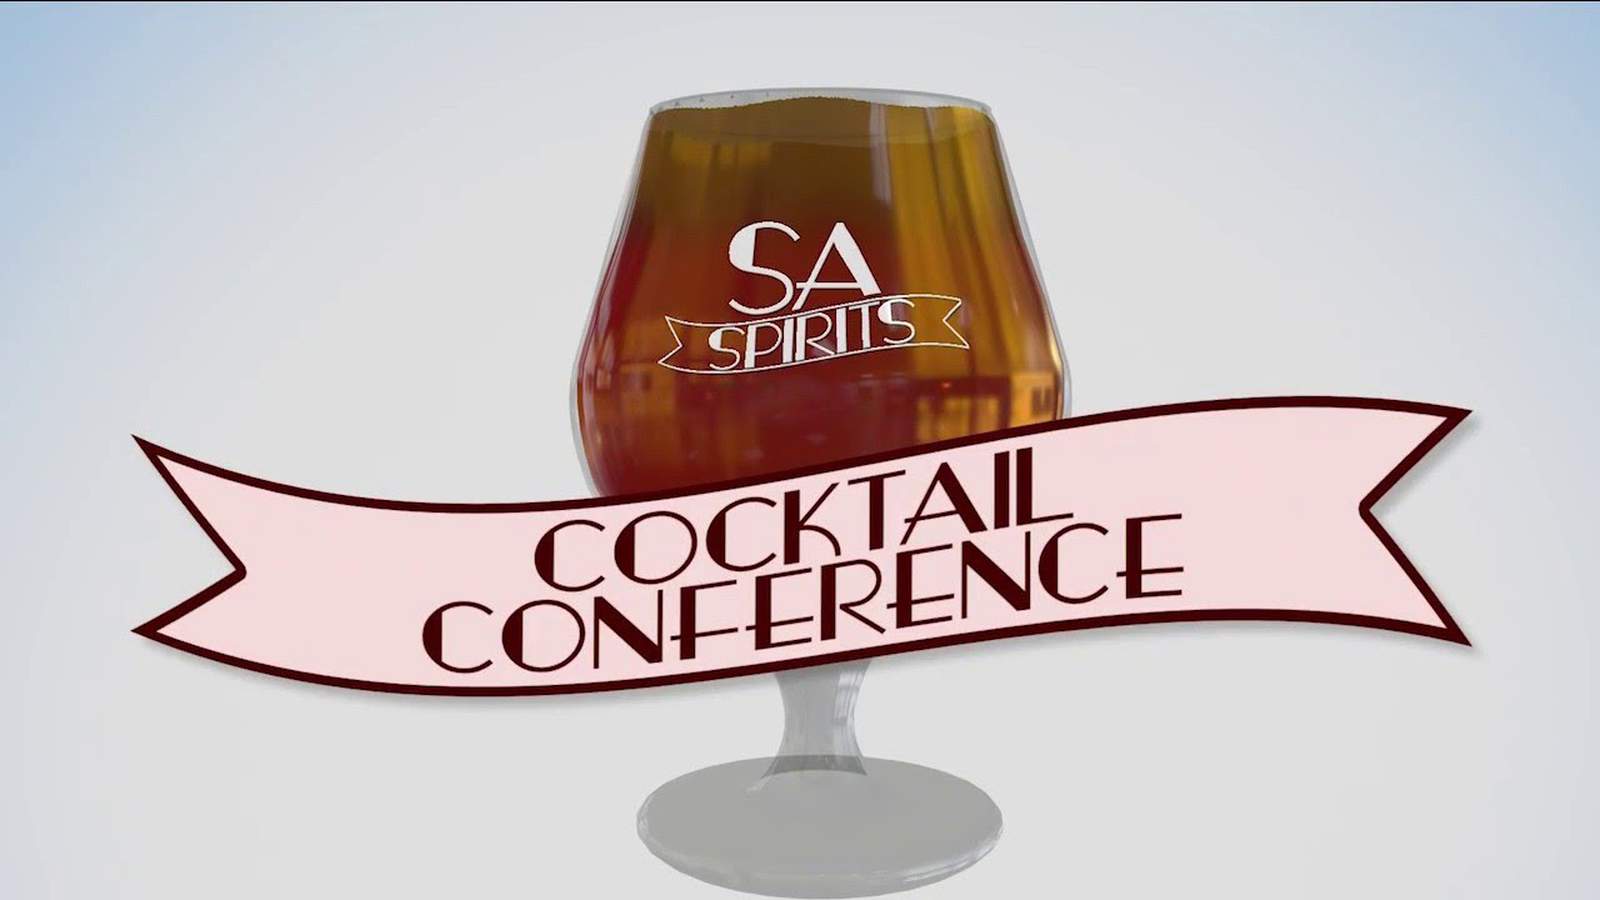 SA Spirits: Cocktail conference grows to become one of top festivals in country